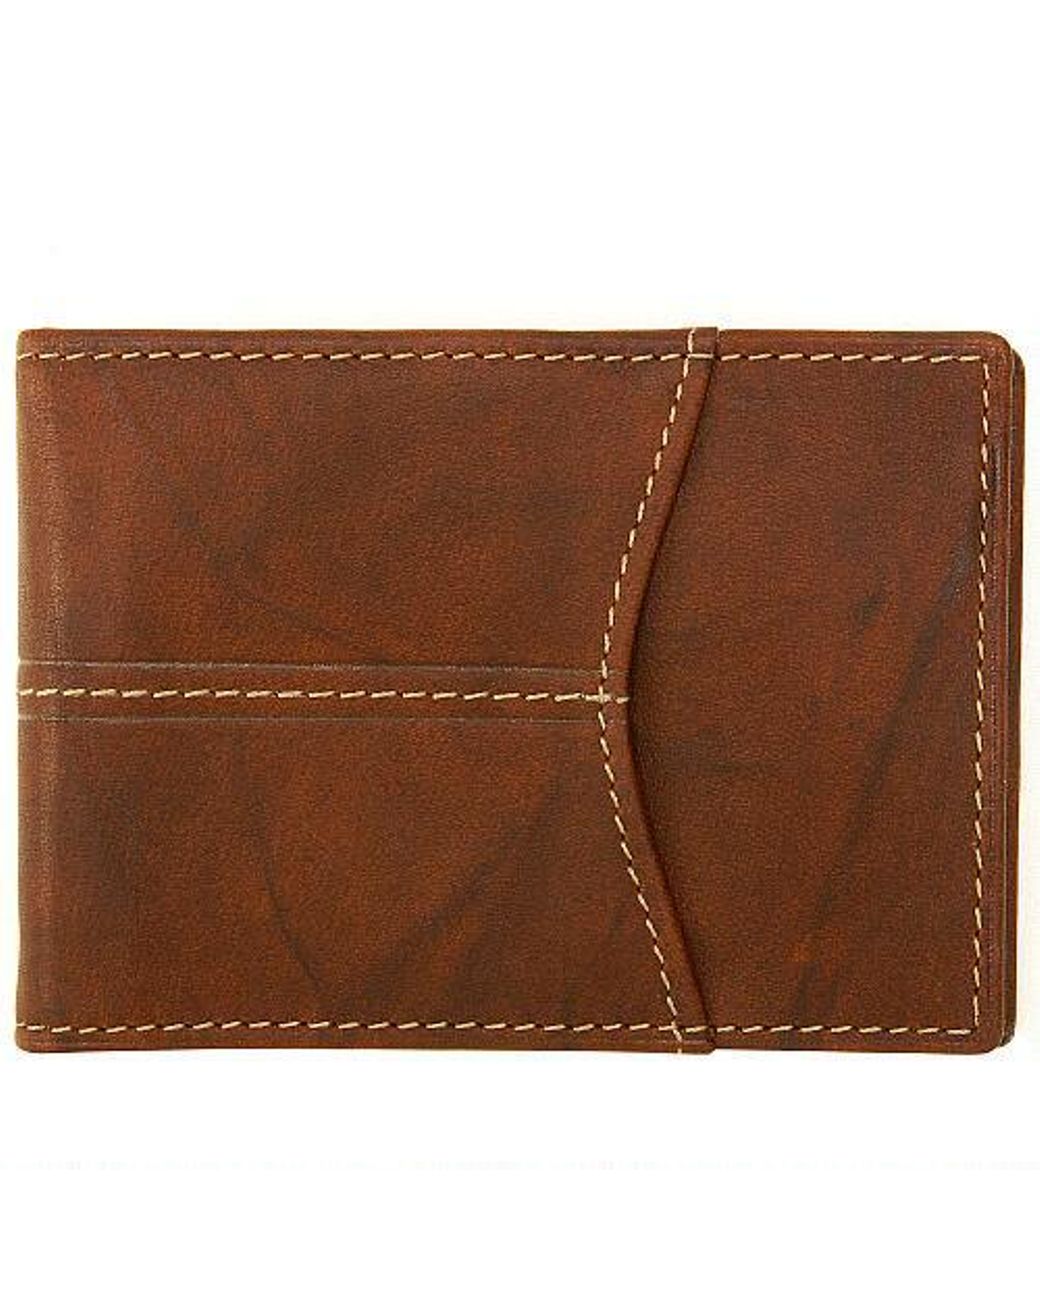 Wilsons Leather Rustler Front Pocket Leather Wallet in Brown for